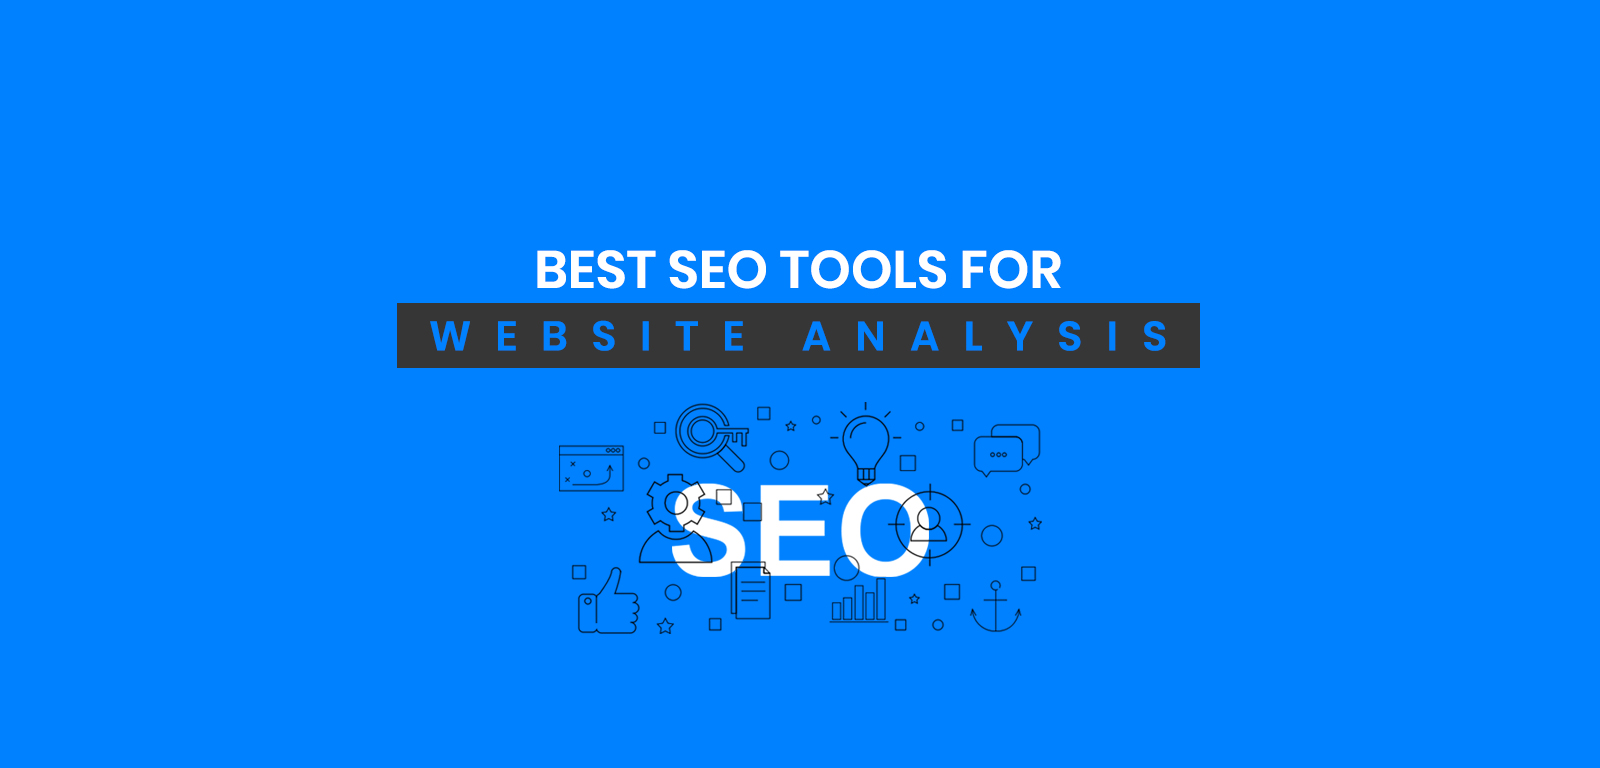 Best SEO Tools for Website Analysis